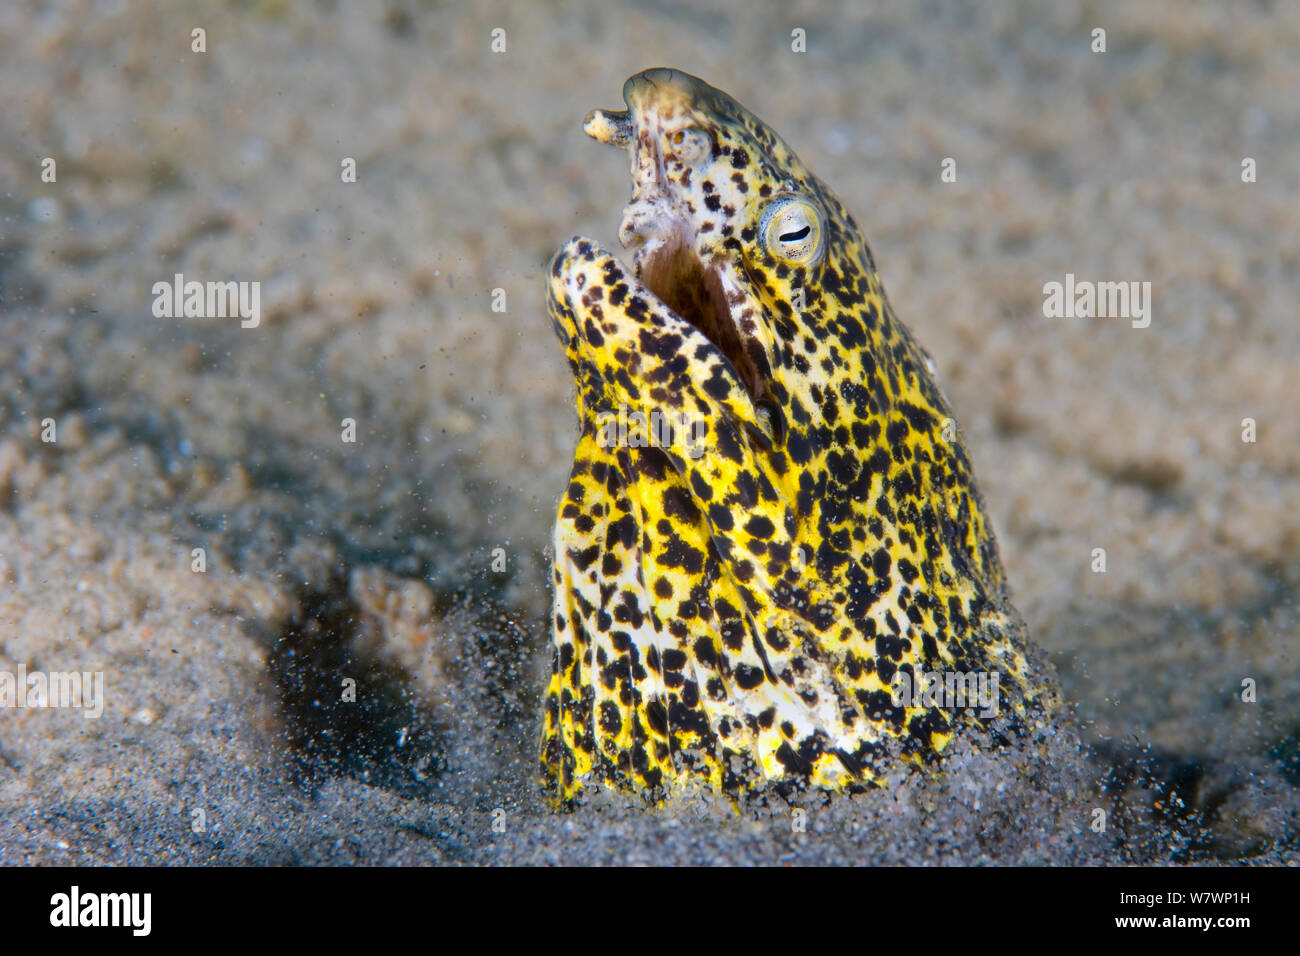 Marbled snake eel (Callechelys marmoratus) thrusts its head out of sand, stiring up the sediment. Nuweiba, Sinai, Egypt. Gulf of Aqaba, Red Sea. Stock Photo